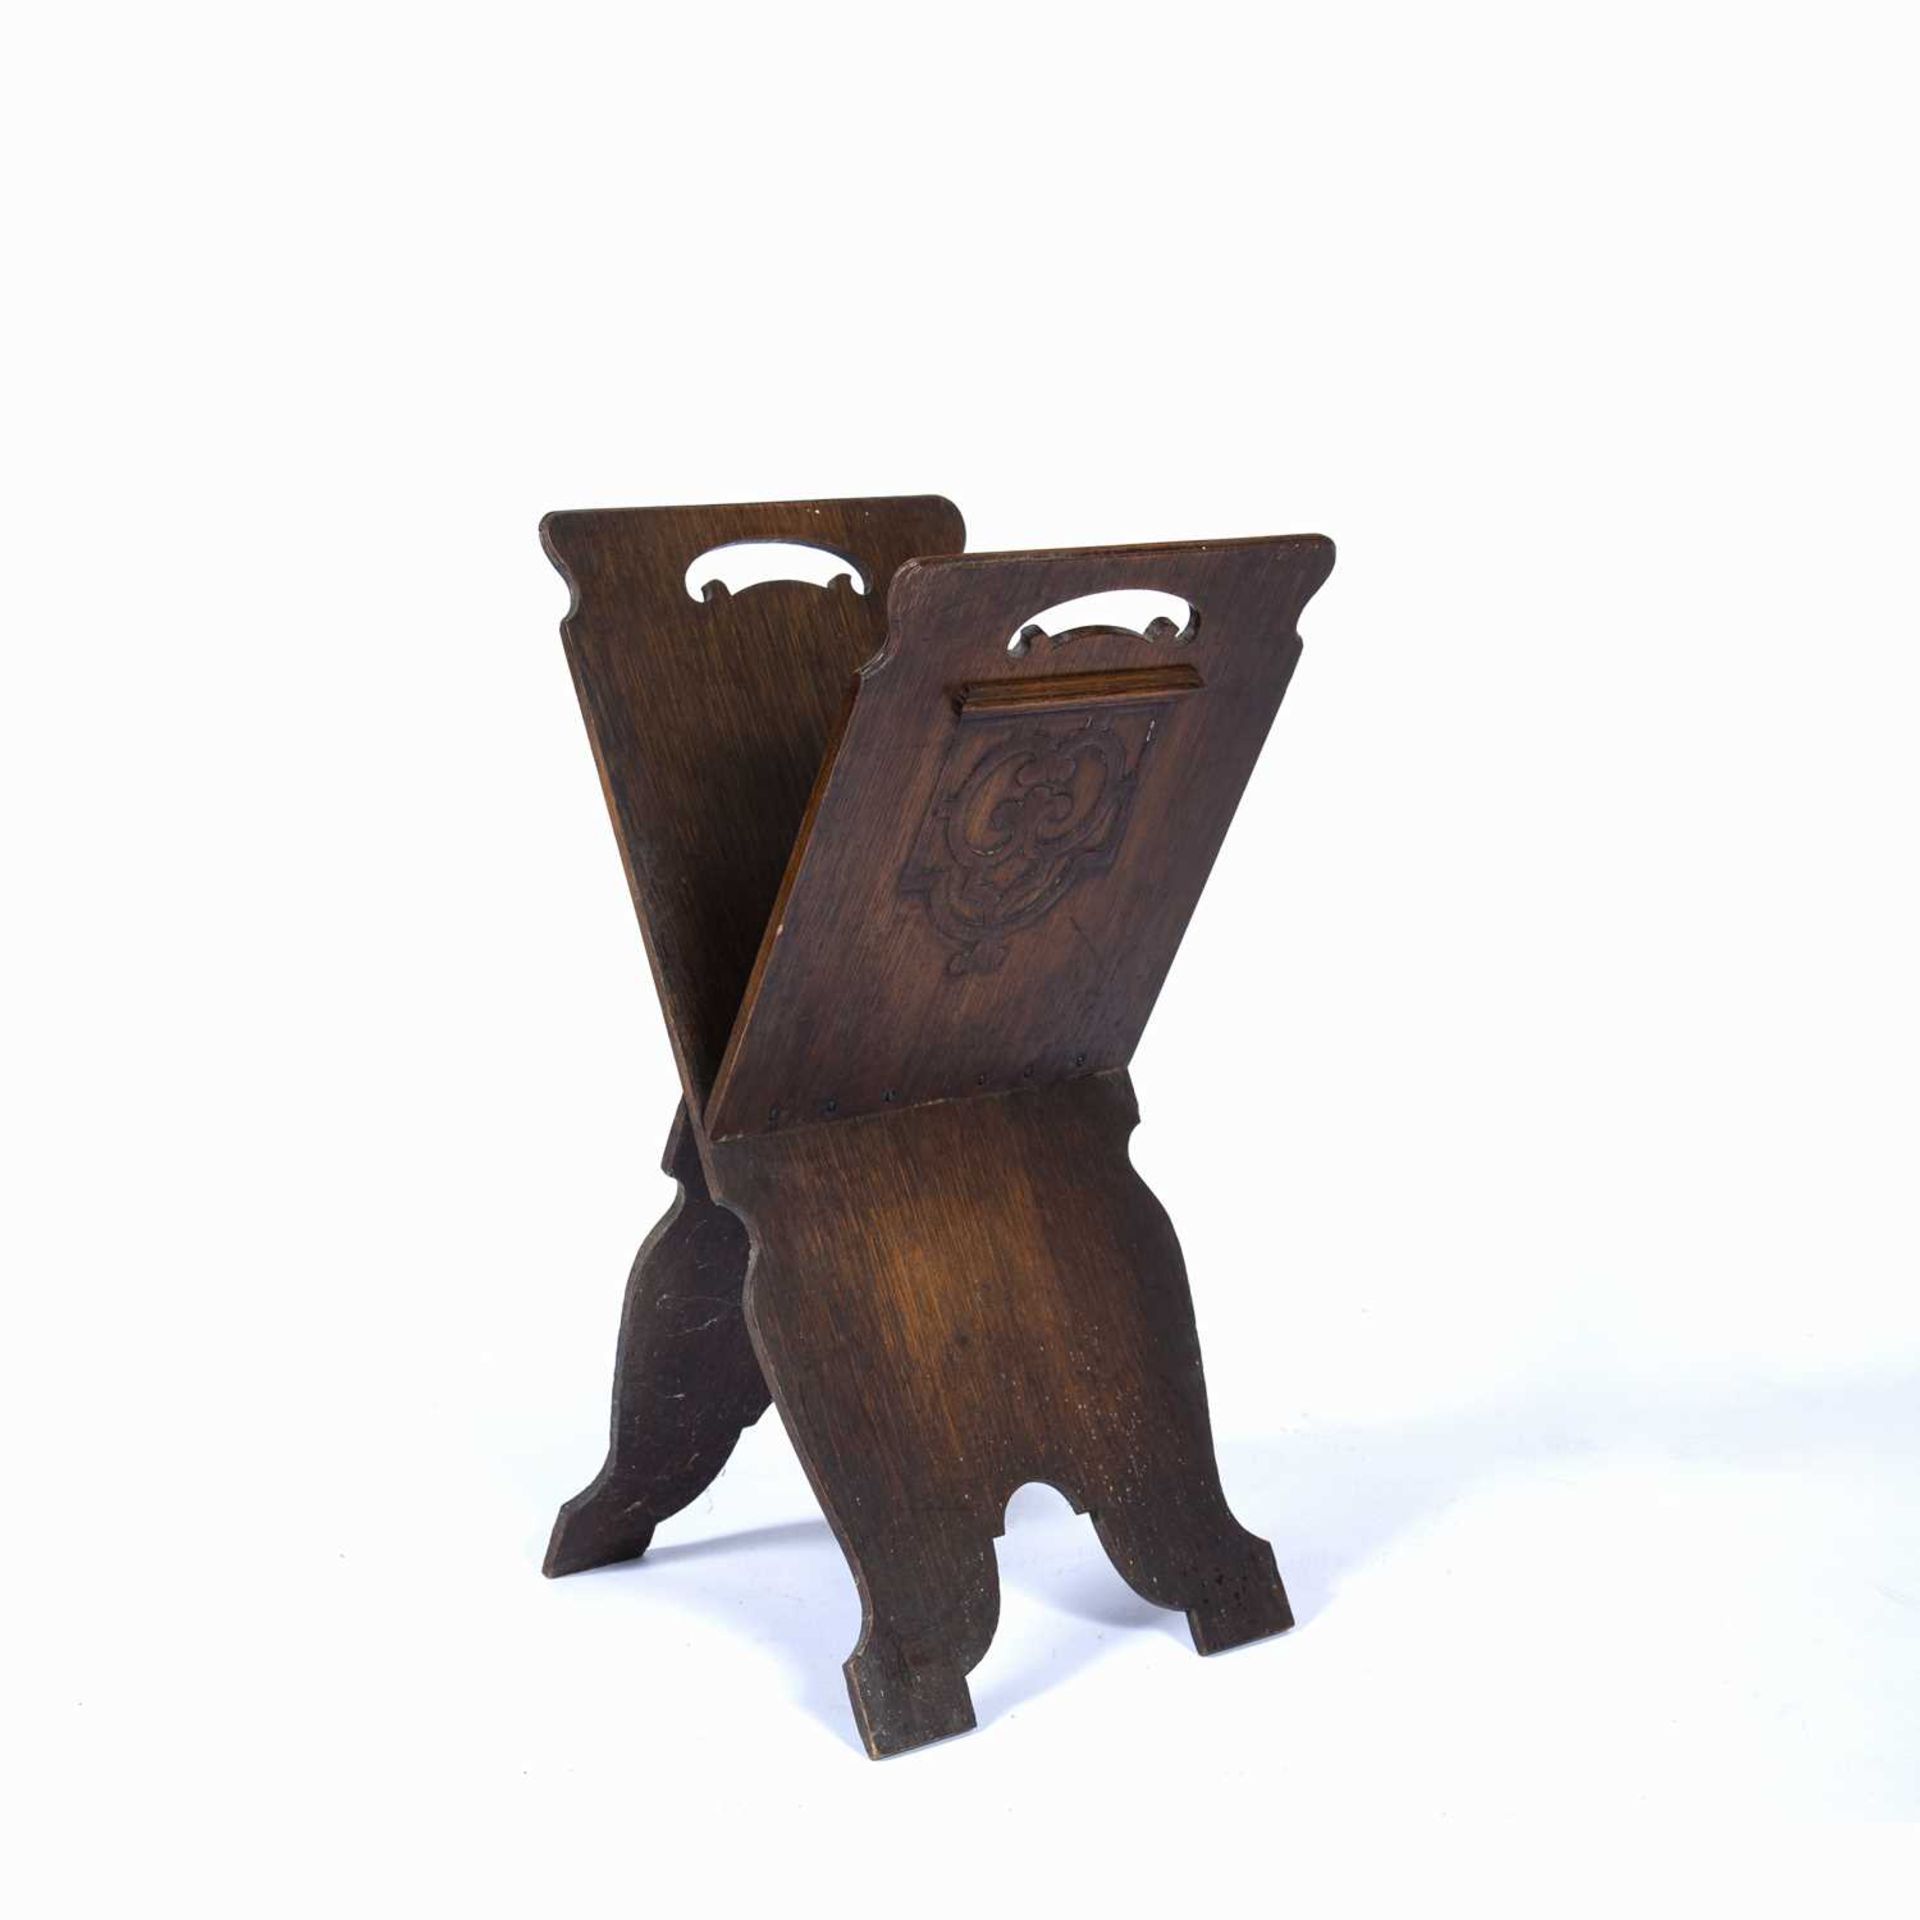 Folding carved oak book rest circa 1930, 72cm x 31cmAt present, there is no condition report